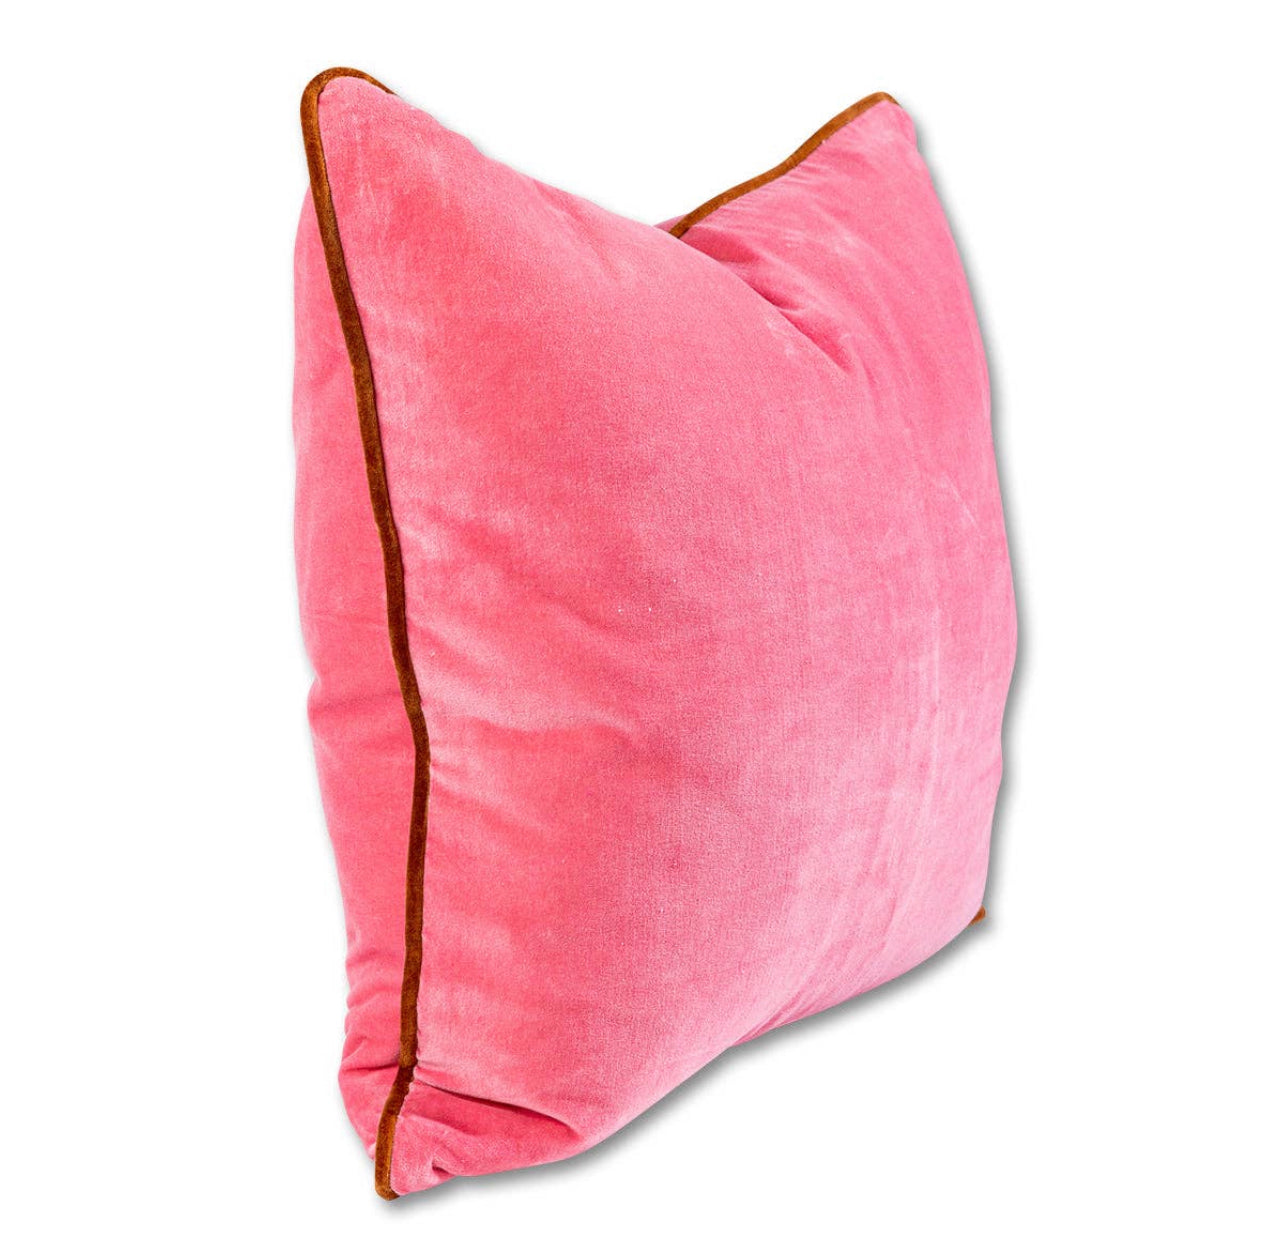 A velvet square rose pink pillow with brown trim edges